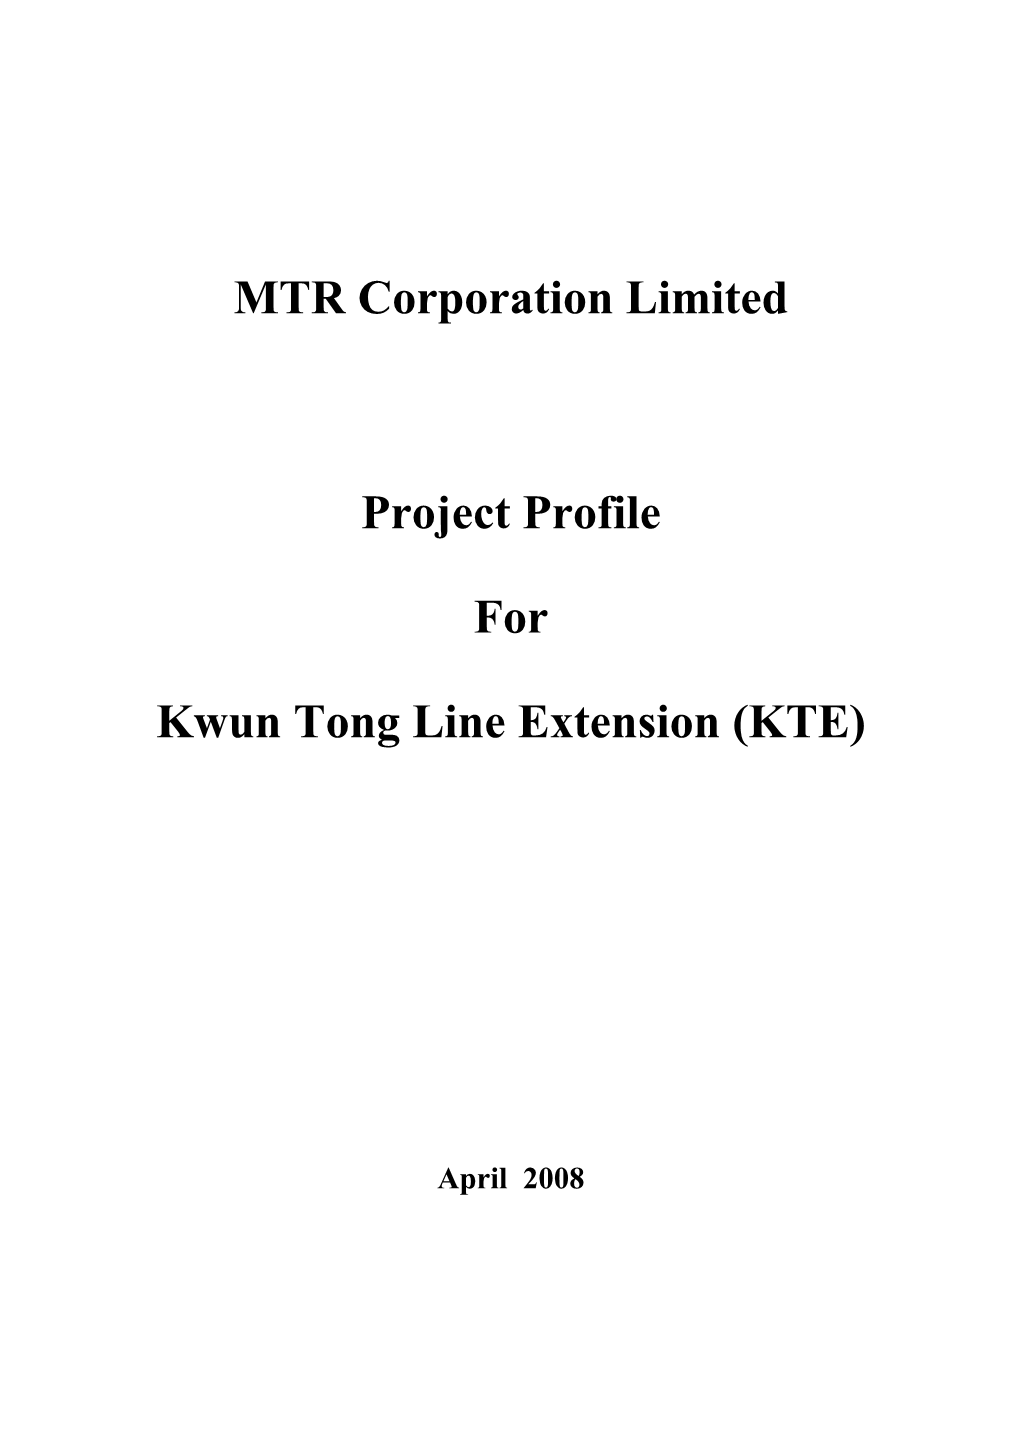 MTR Corporation Limited Project Profile for Kwun Tong Line Extension